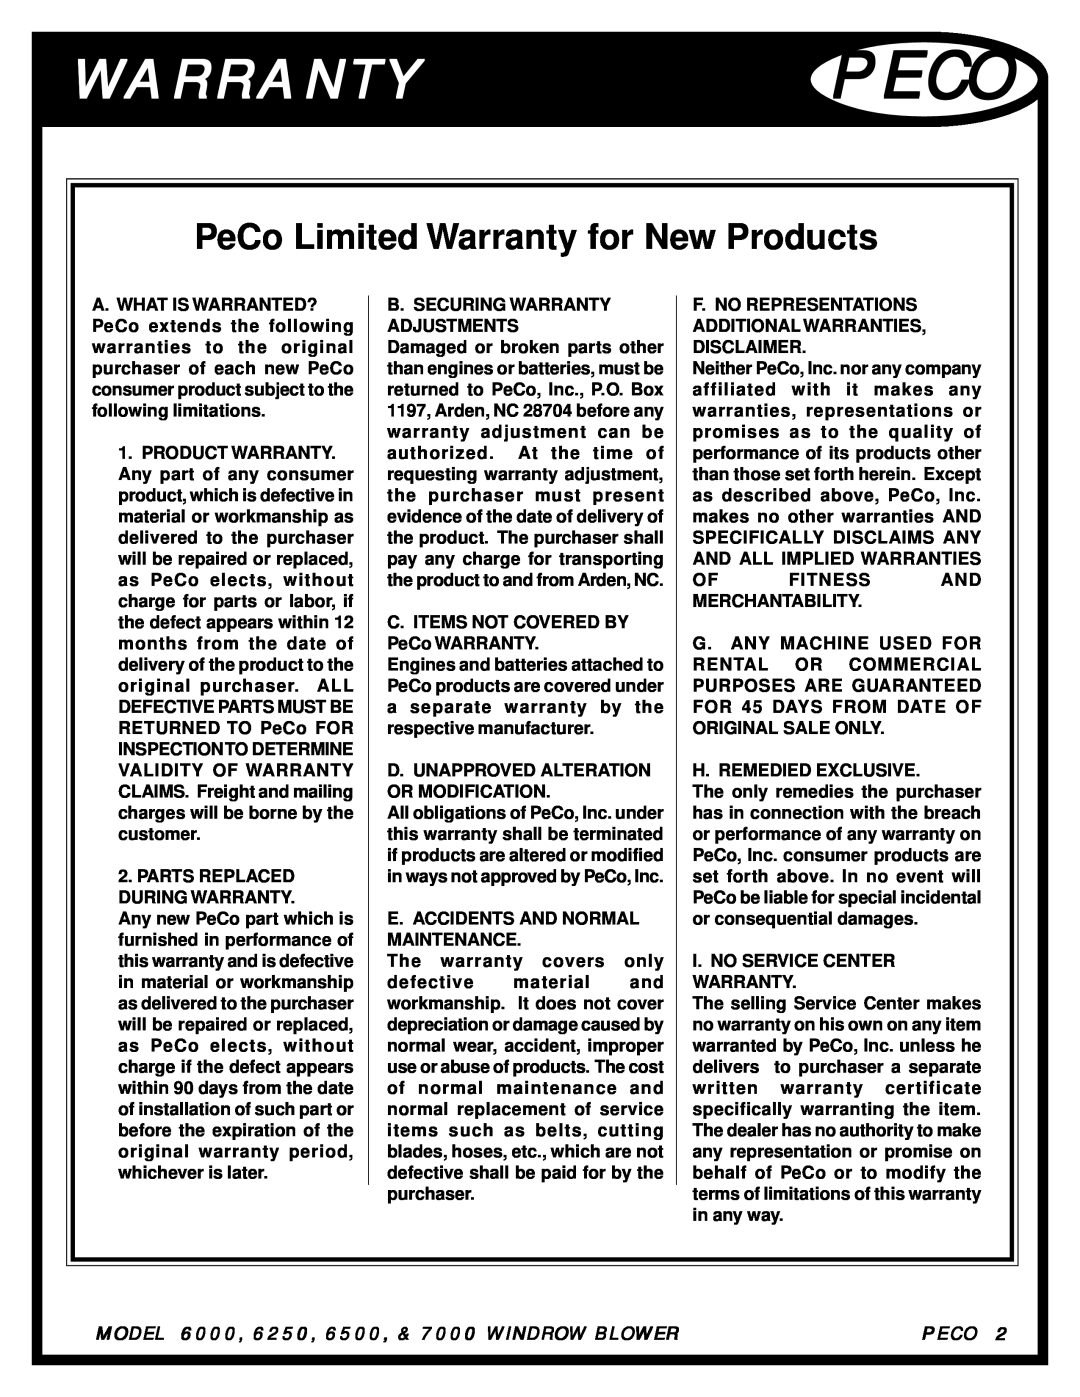 Pecoware Warrantypeco, PeCo Limited Warranty for New Products, MODEL 6000, 6250, 6500, & 7000 WINDROW BLOWER, Peco 